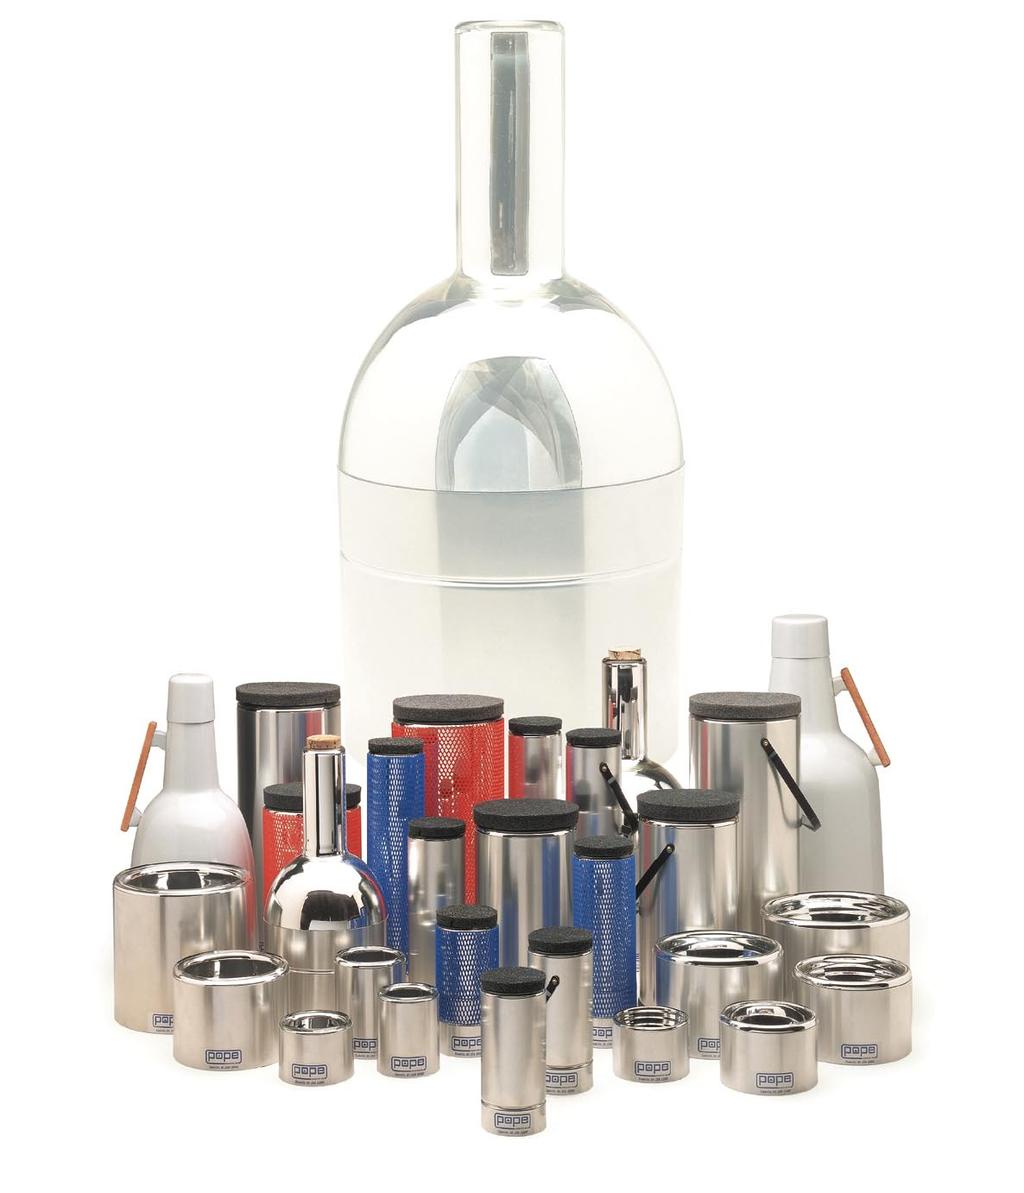 COMPLETE DEWAR FLASK LINE Pope Dewar Flasks are stocked in three popular lines: Low Form Shallow, Lab Grade and Handled Lab Grade.